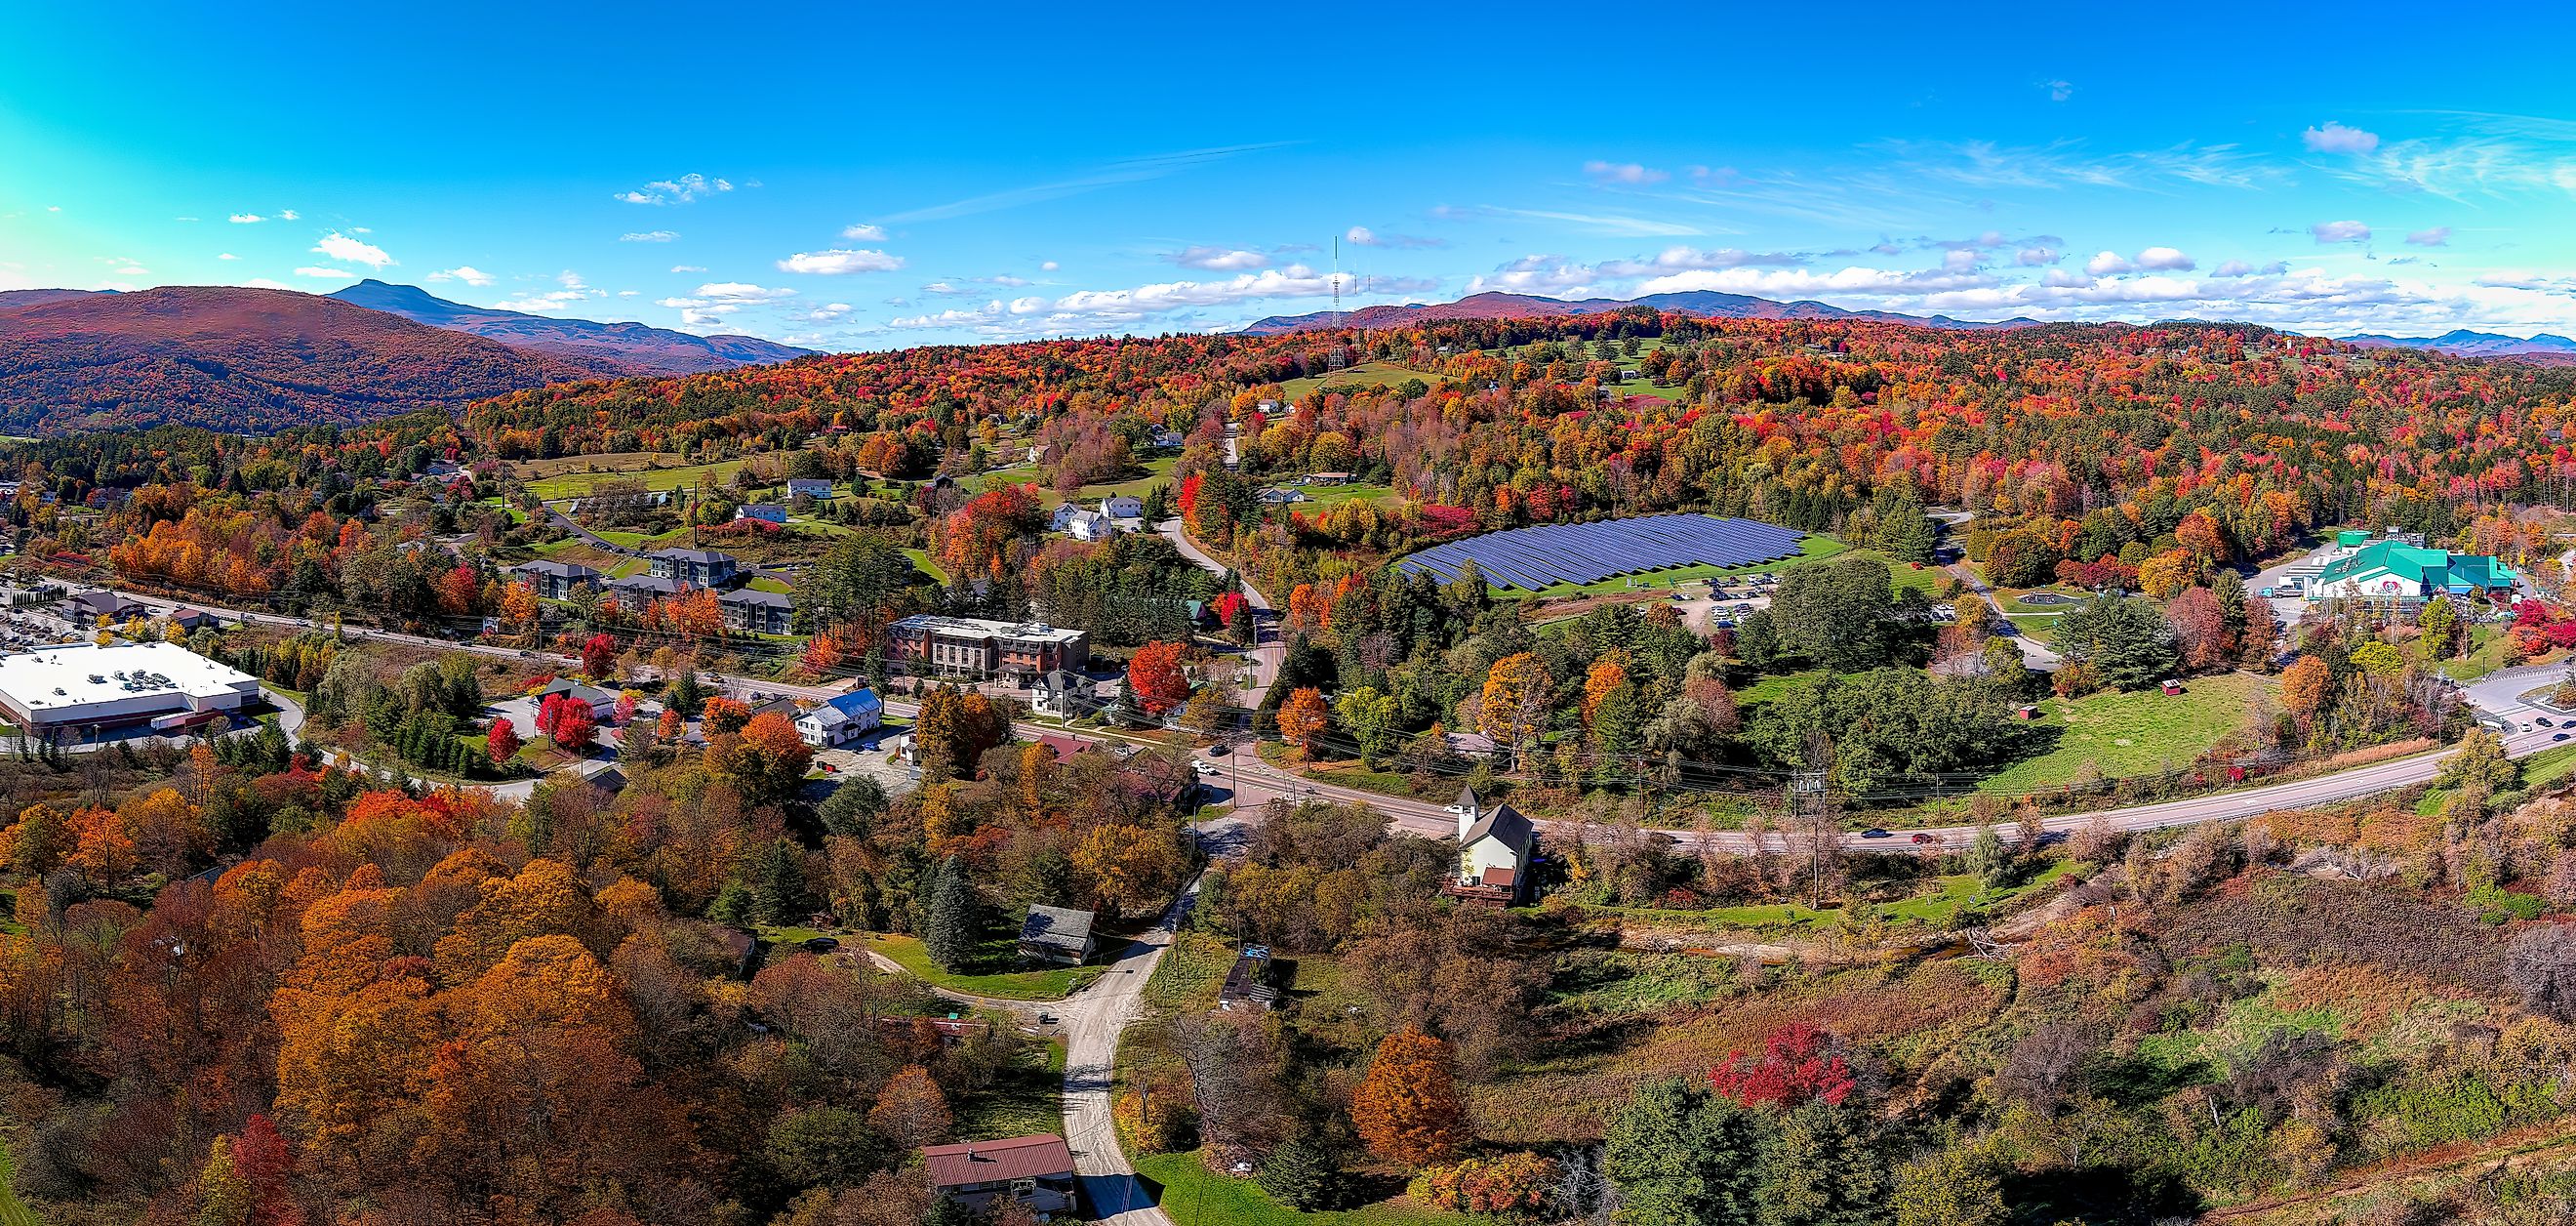 Aerial view of the town and surrounding greenery in Waterbury, Vermont.